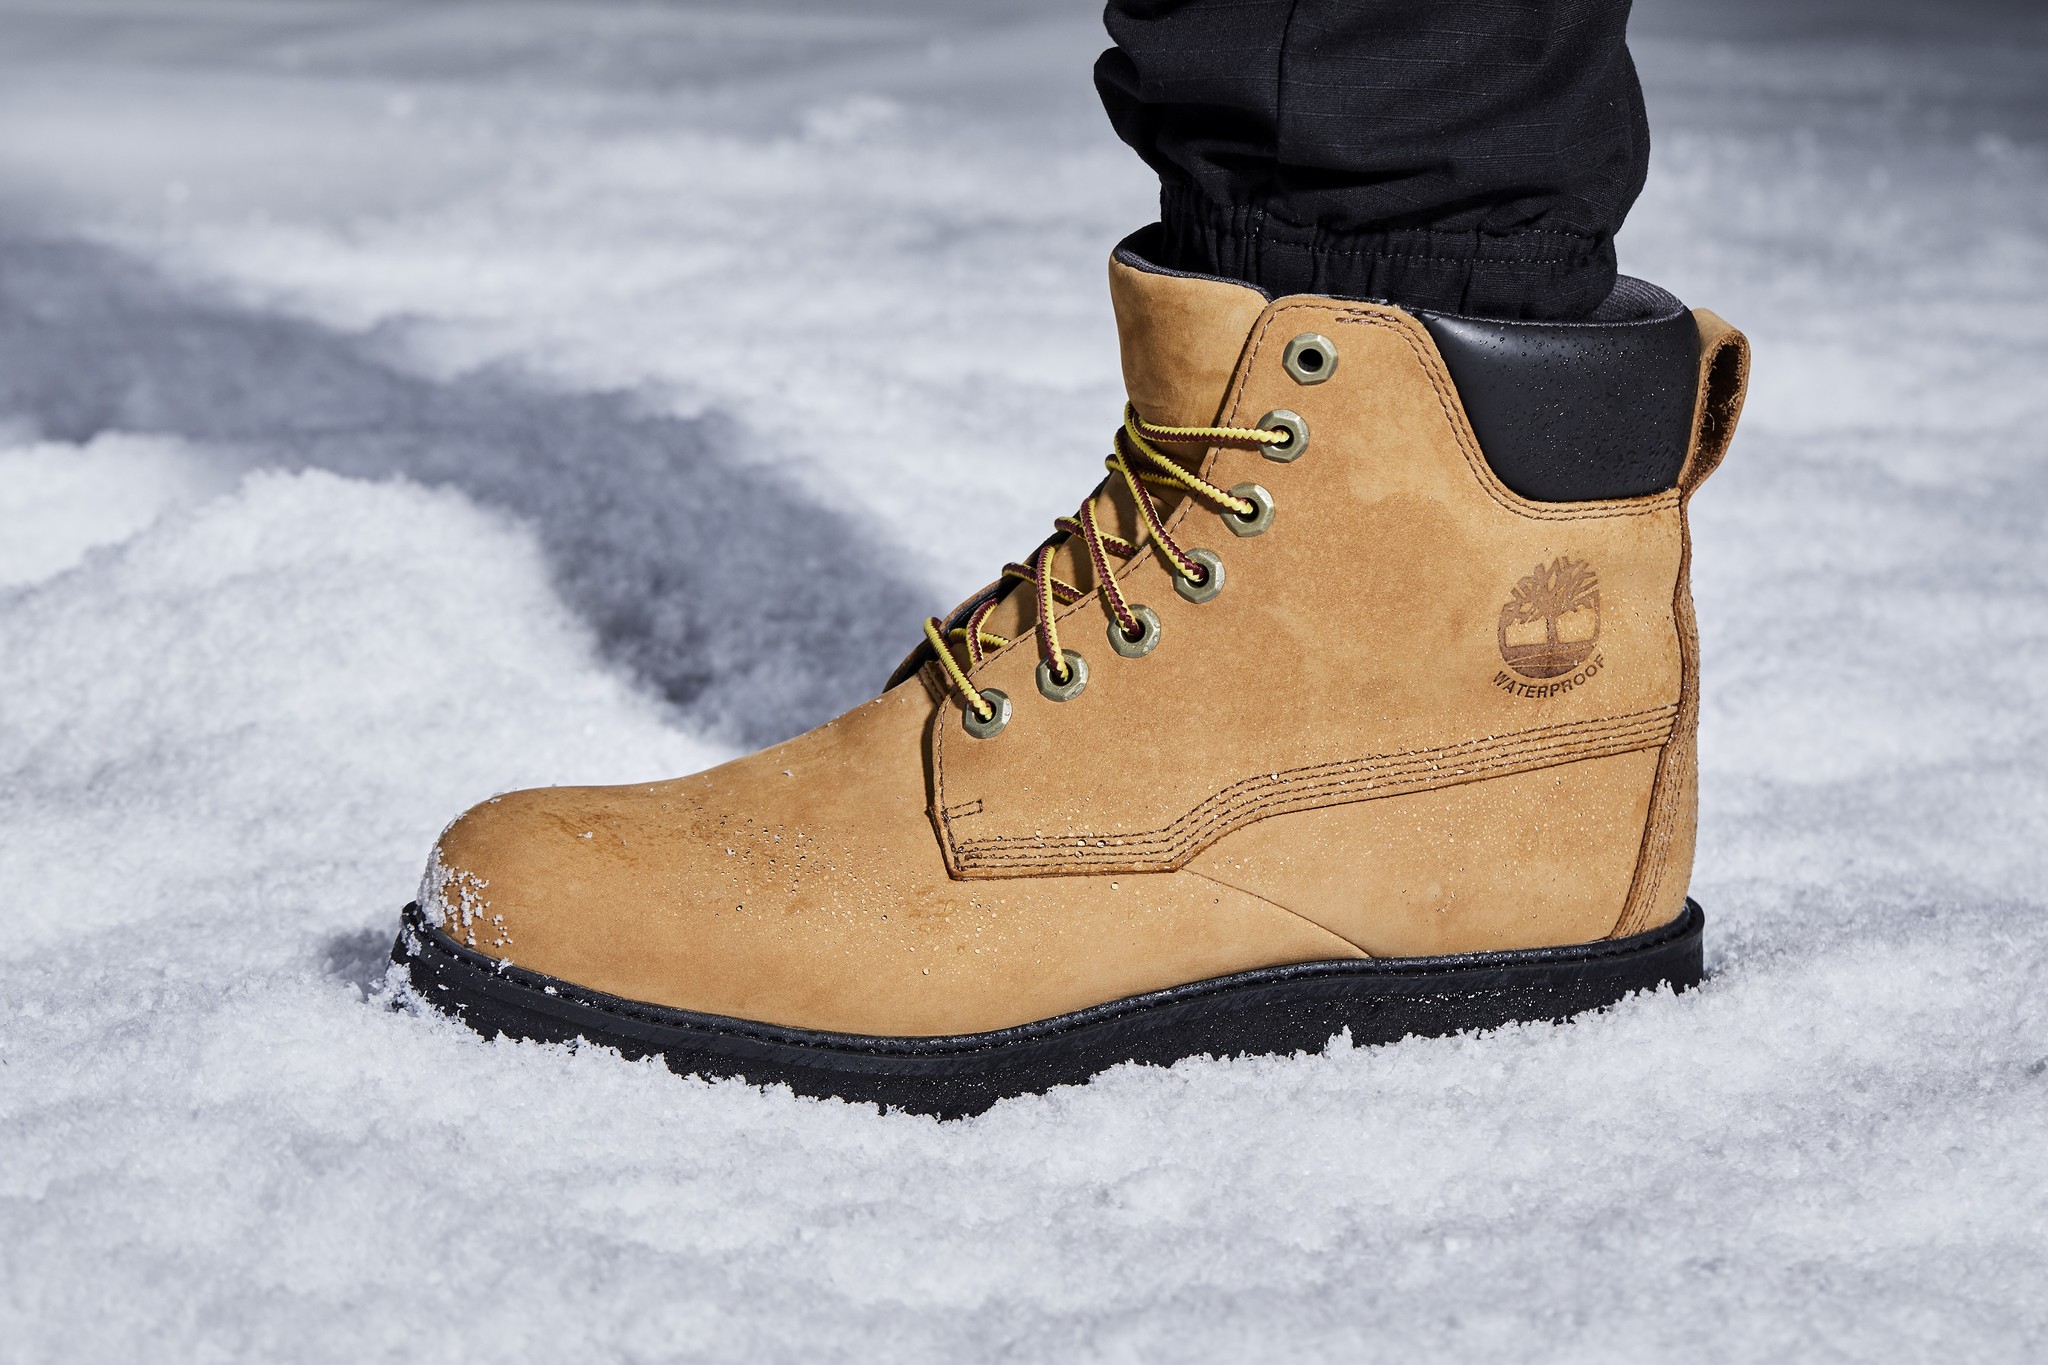 Timberland " THE ULTIMATE WINTER BOOT & JACKET COLLECTION "｜VFジャパン株式会社の